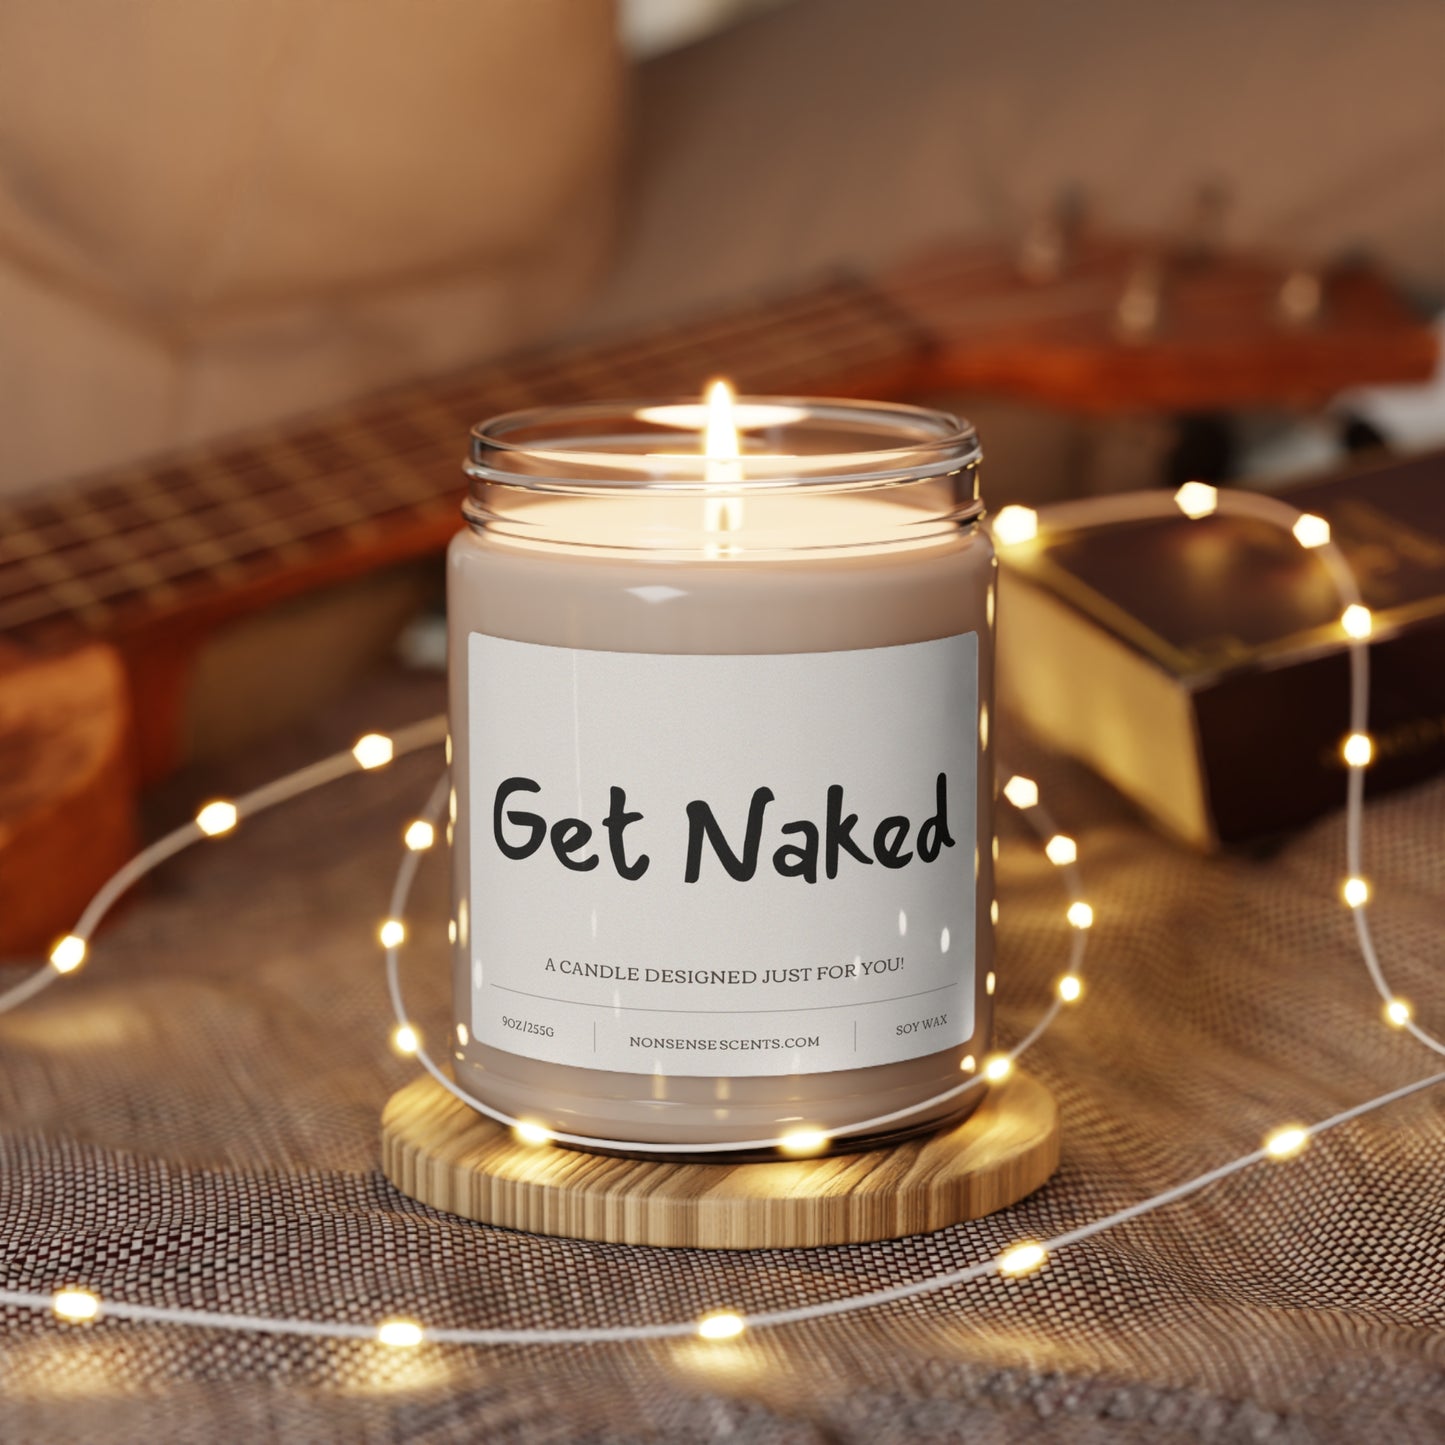 "Get Naked" Scented Candle